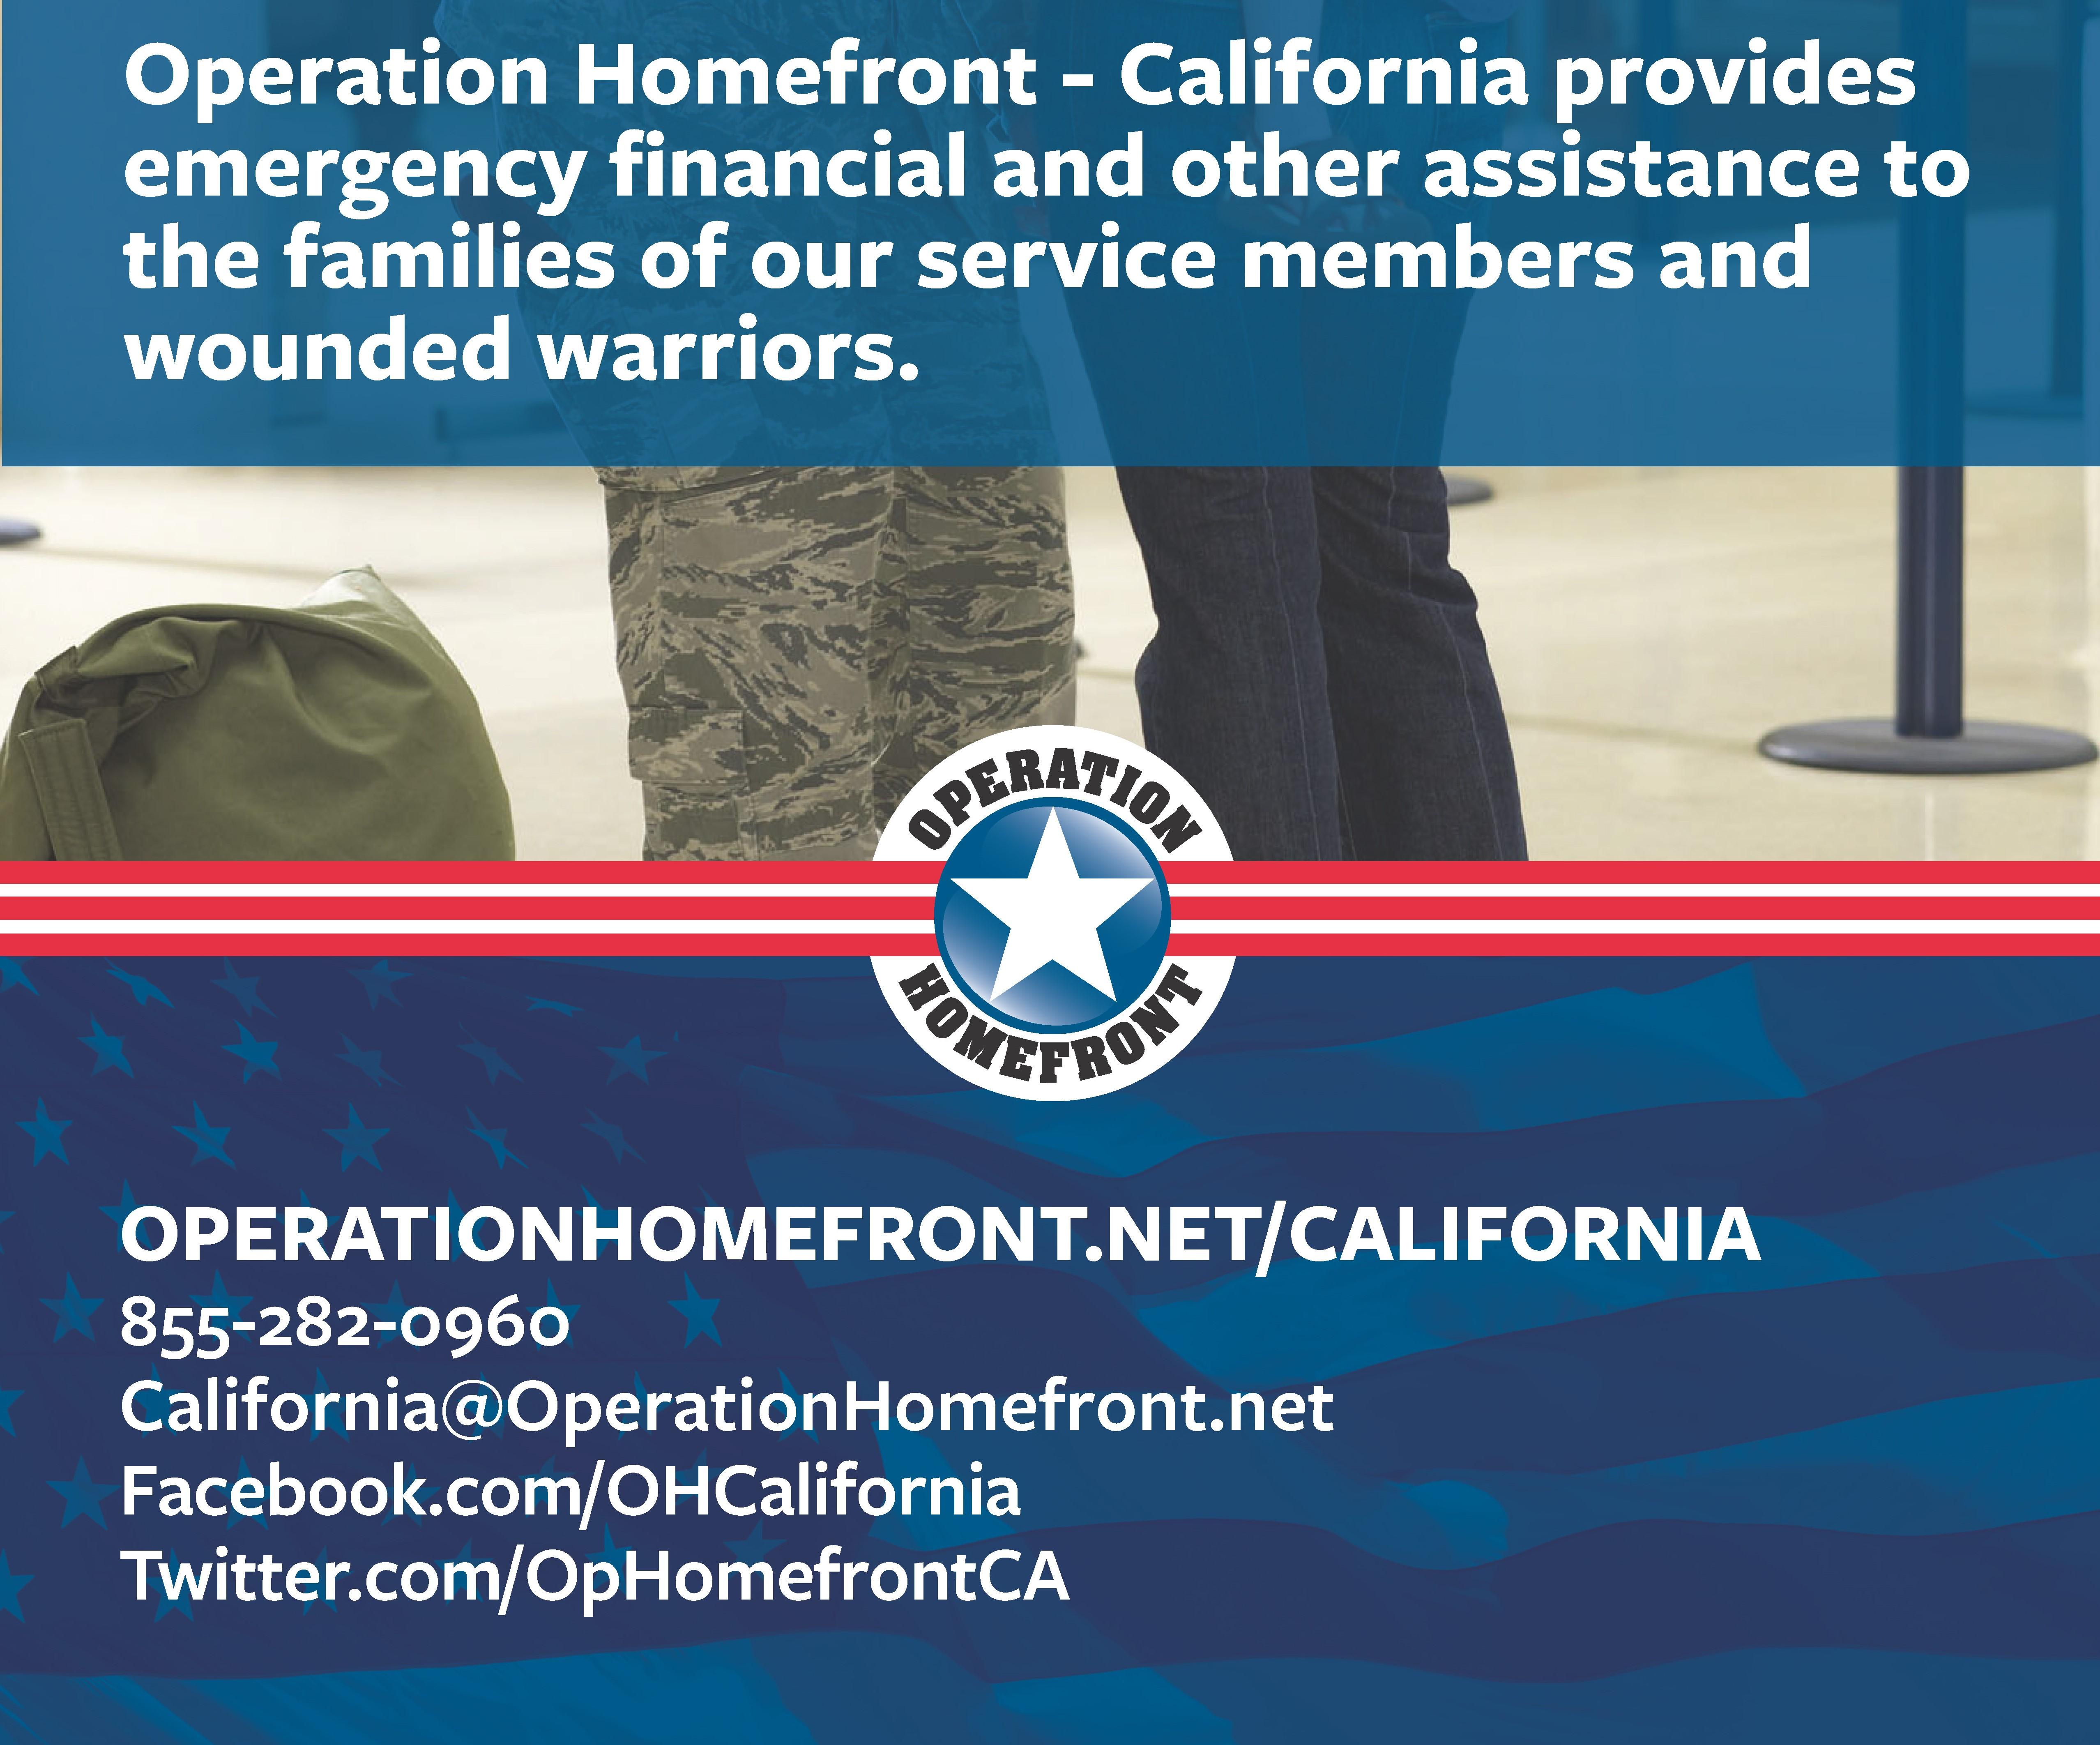 download my operation homefront